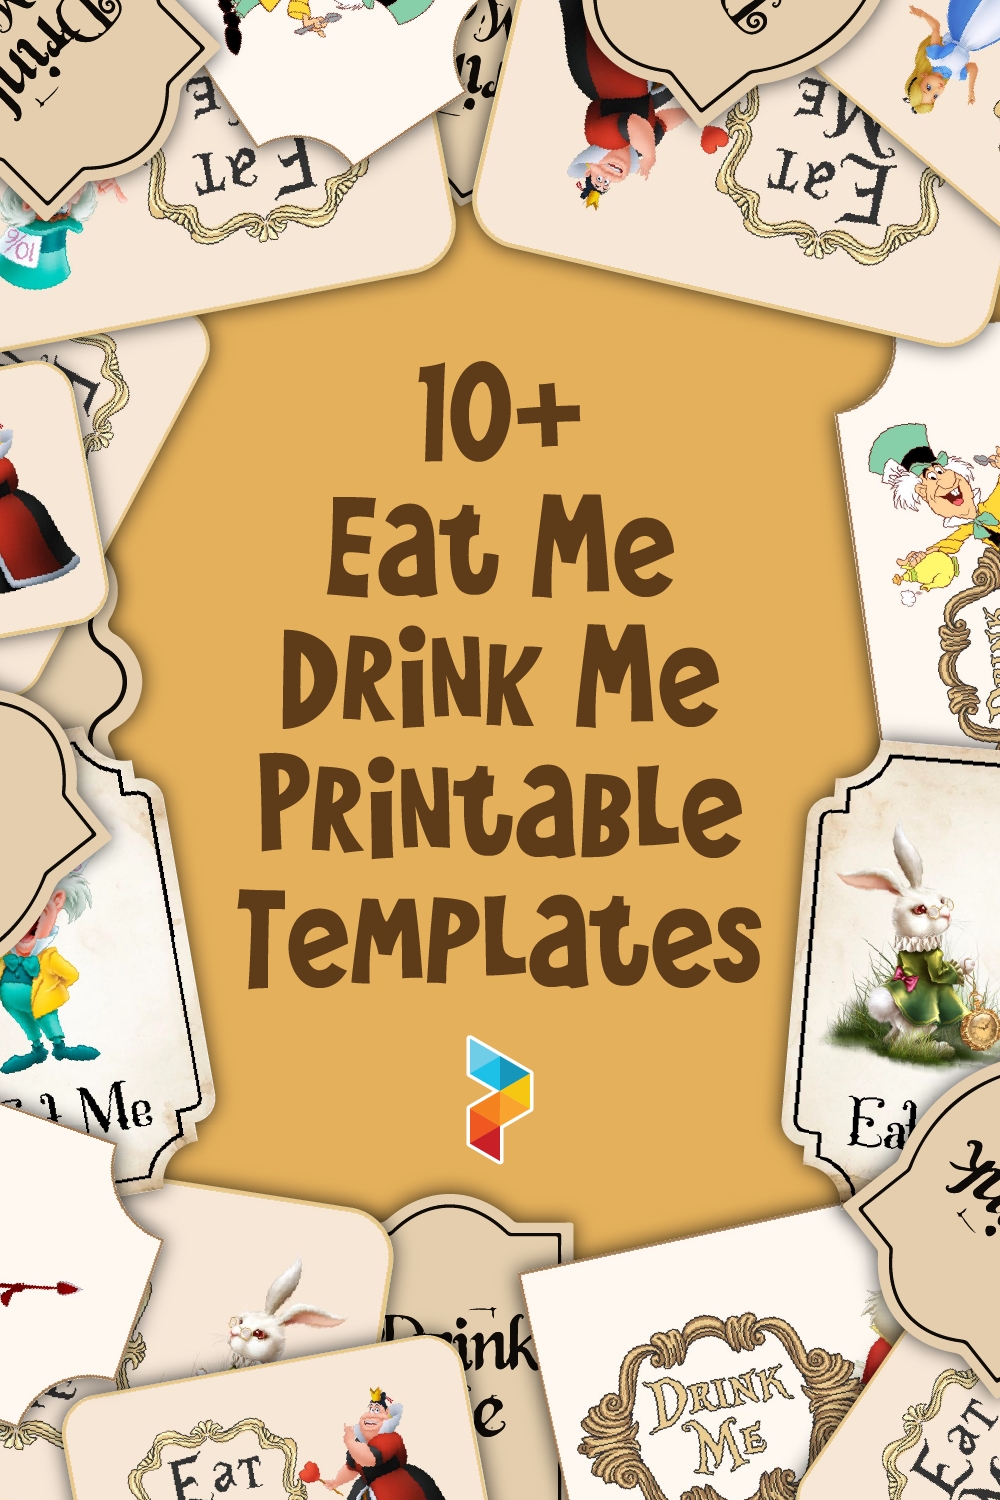 Eat Me Drink Me Templates